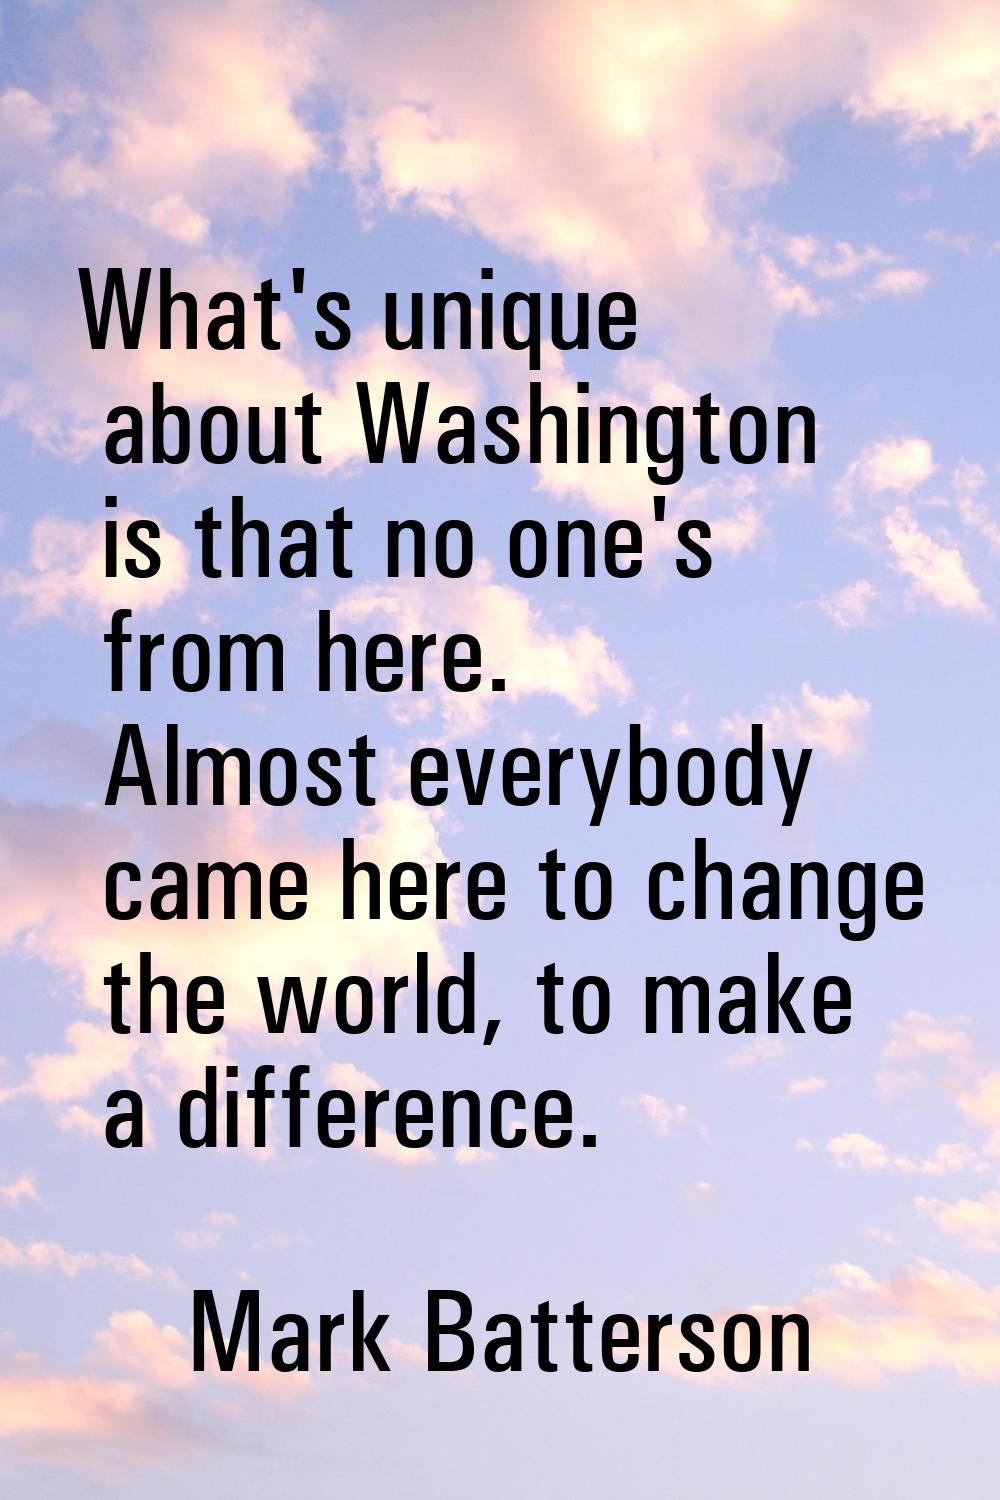 What's unique about Washington is that no one's from here. Almost everybody came here to change the